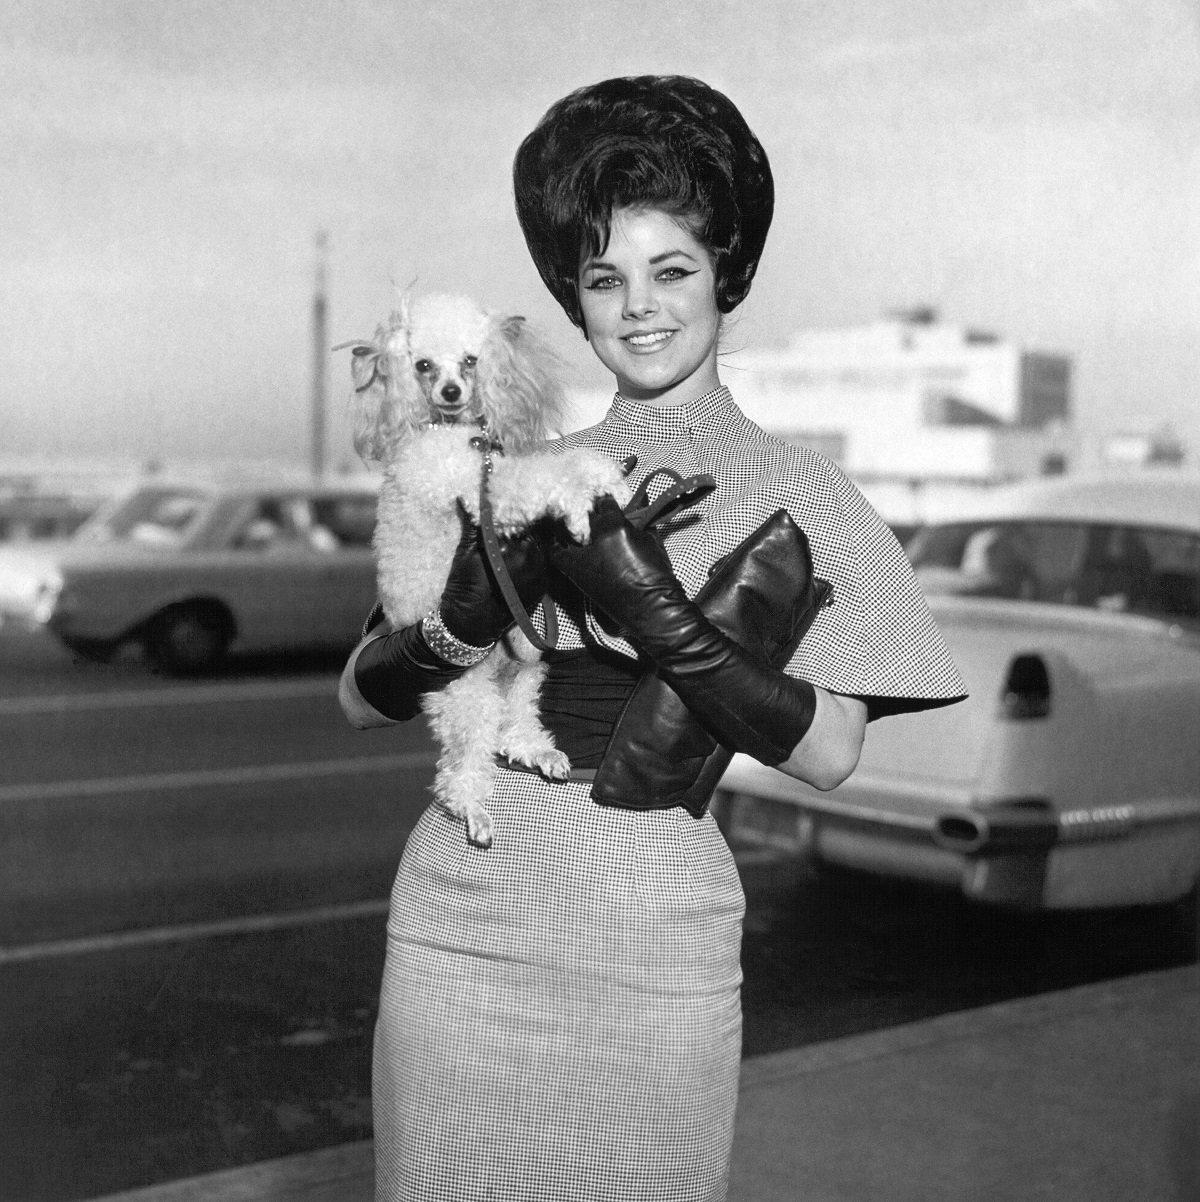 Priscilla Beaulieu in Jan. 1963 with her new dog, Honey